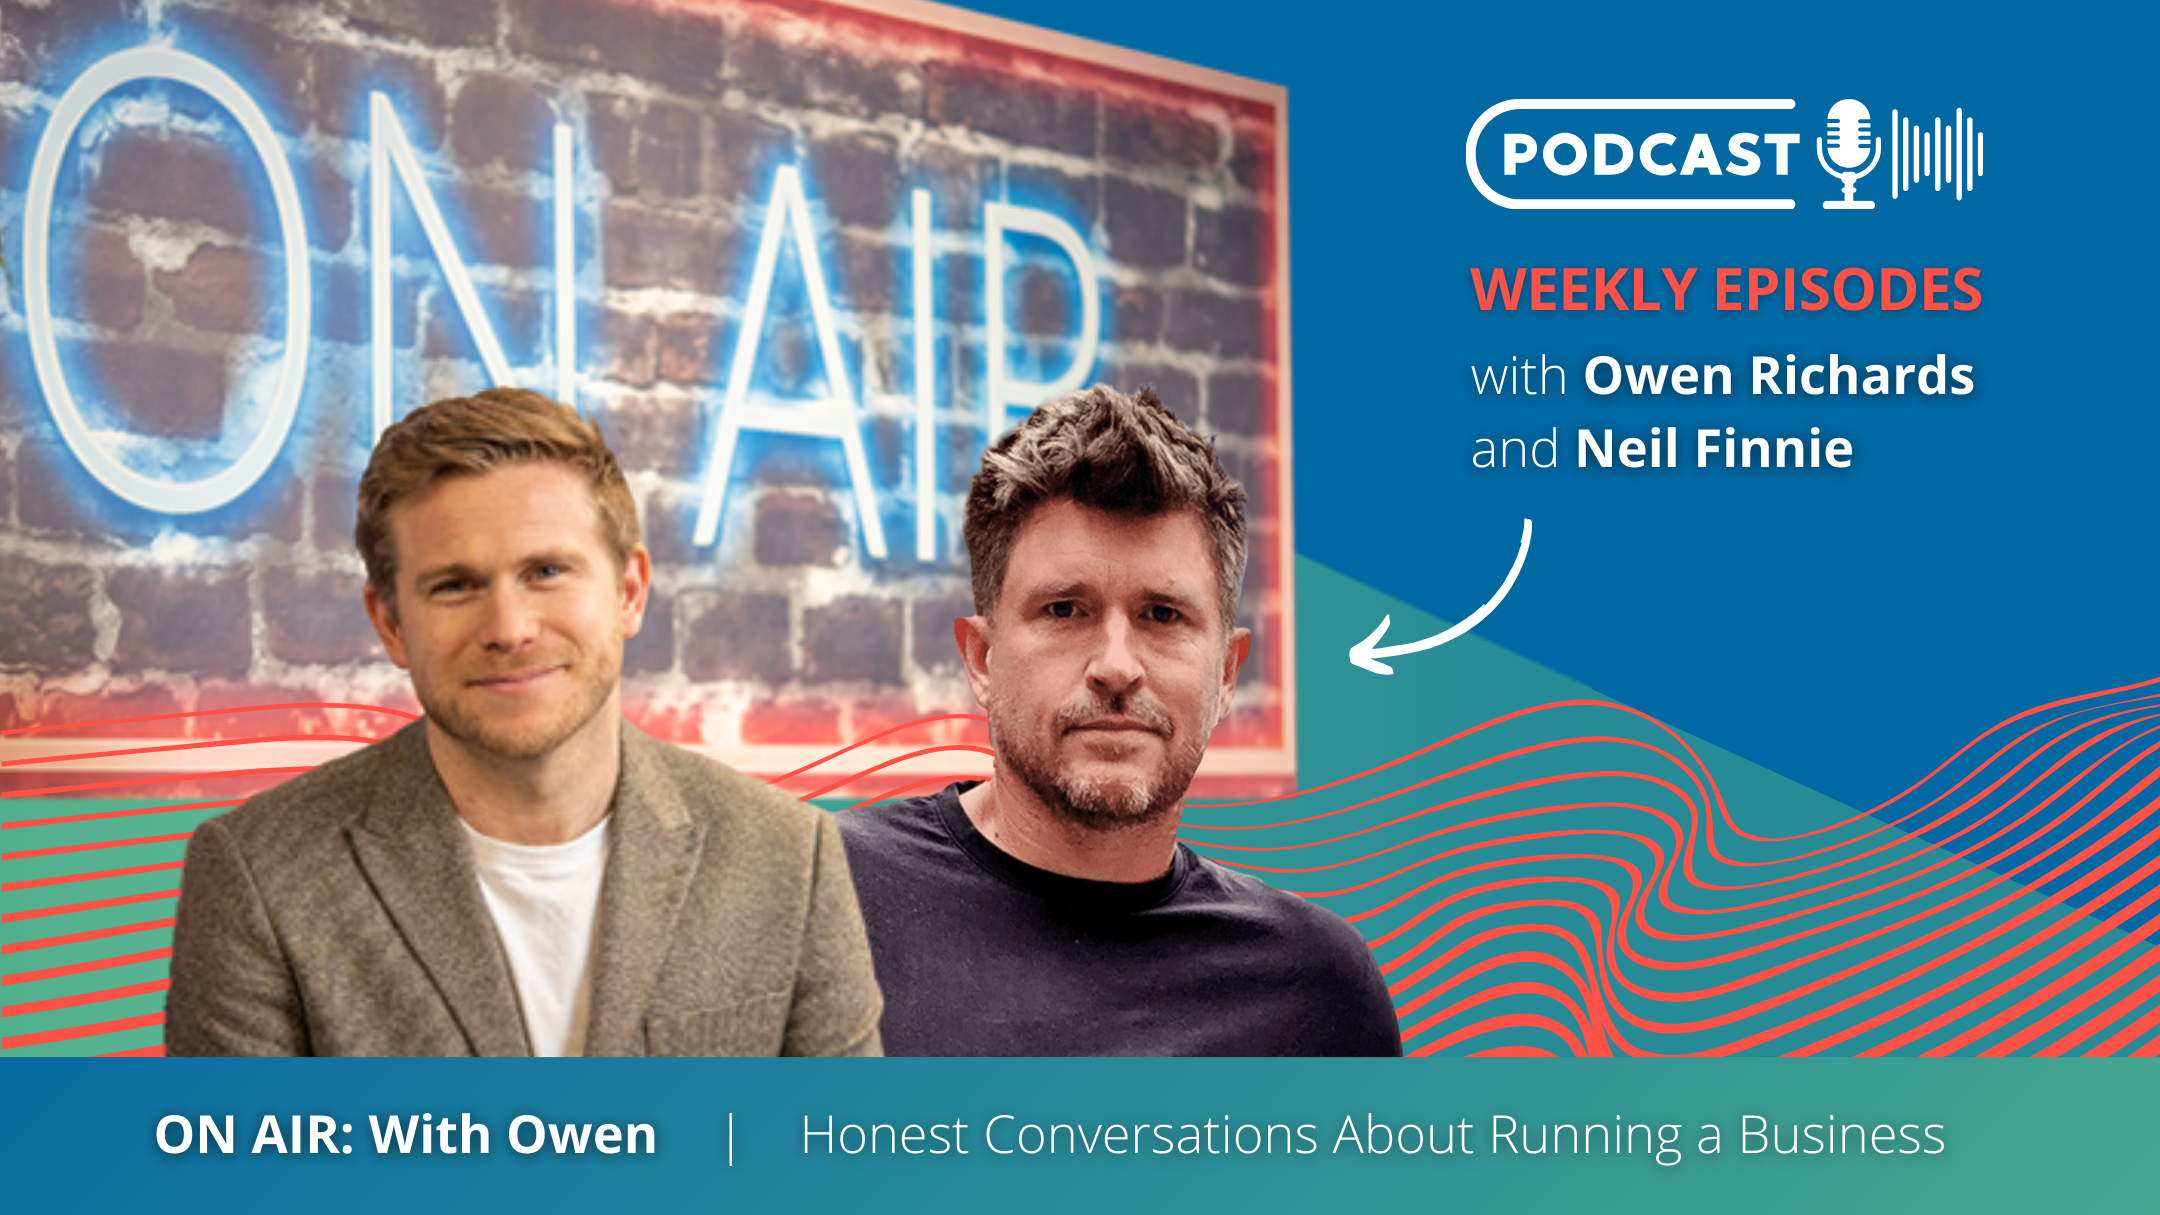 ON AIR With Owen: Episode 90 | How To Thrive When Key Employees Leave Your Business